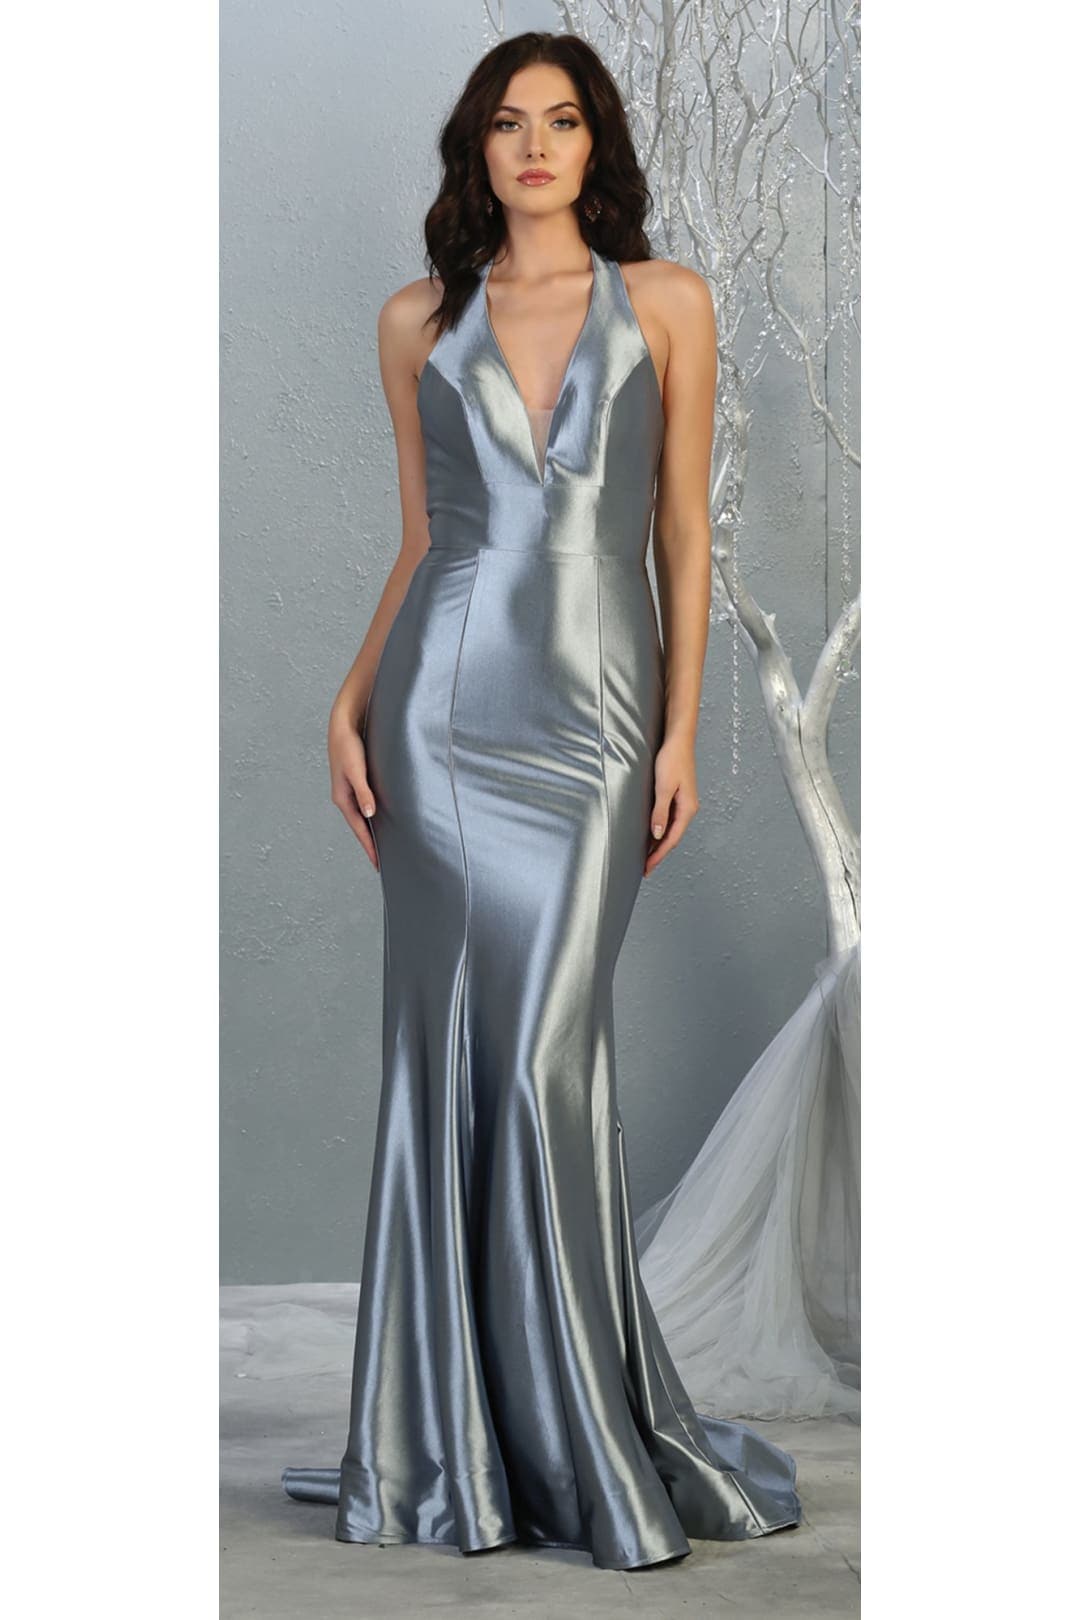 Silmple Prom Long Formal Gown - DUSTY BLUE / 4